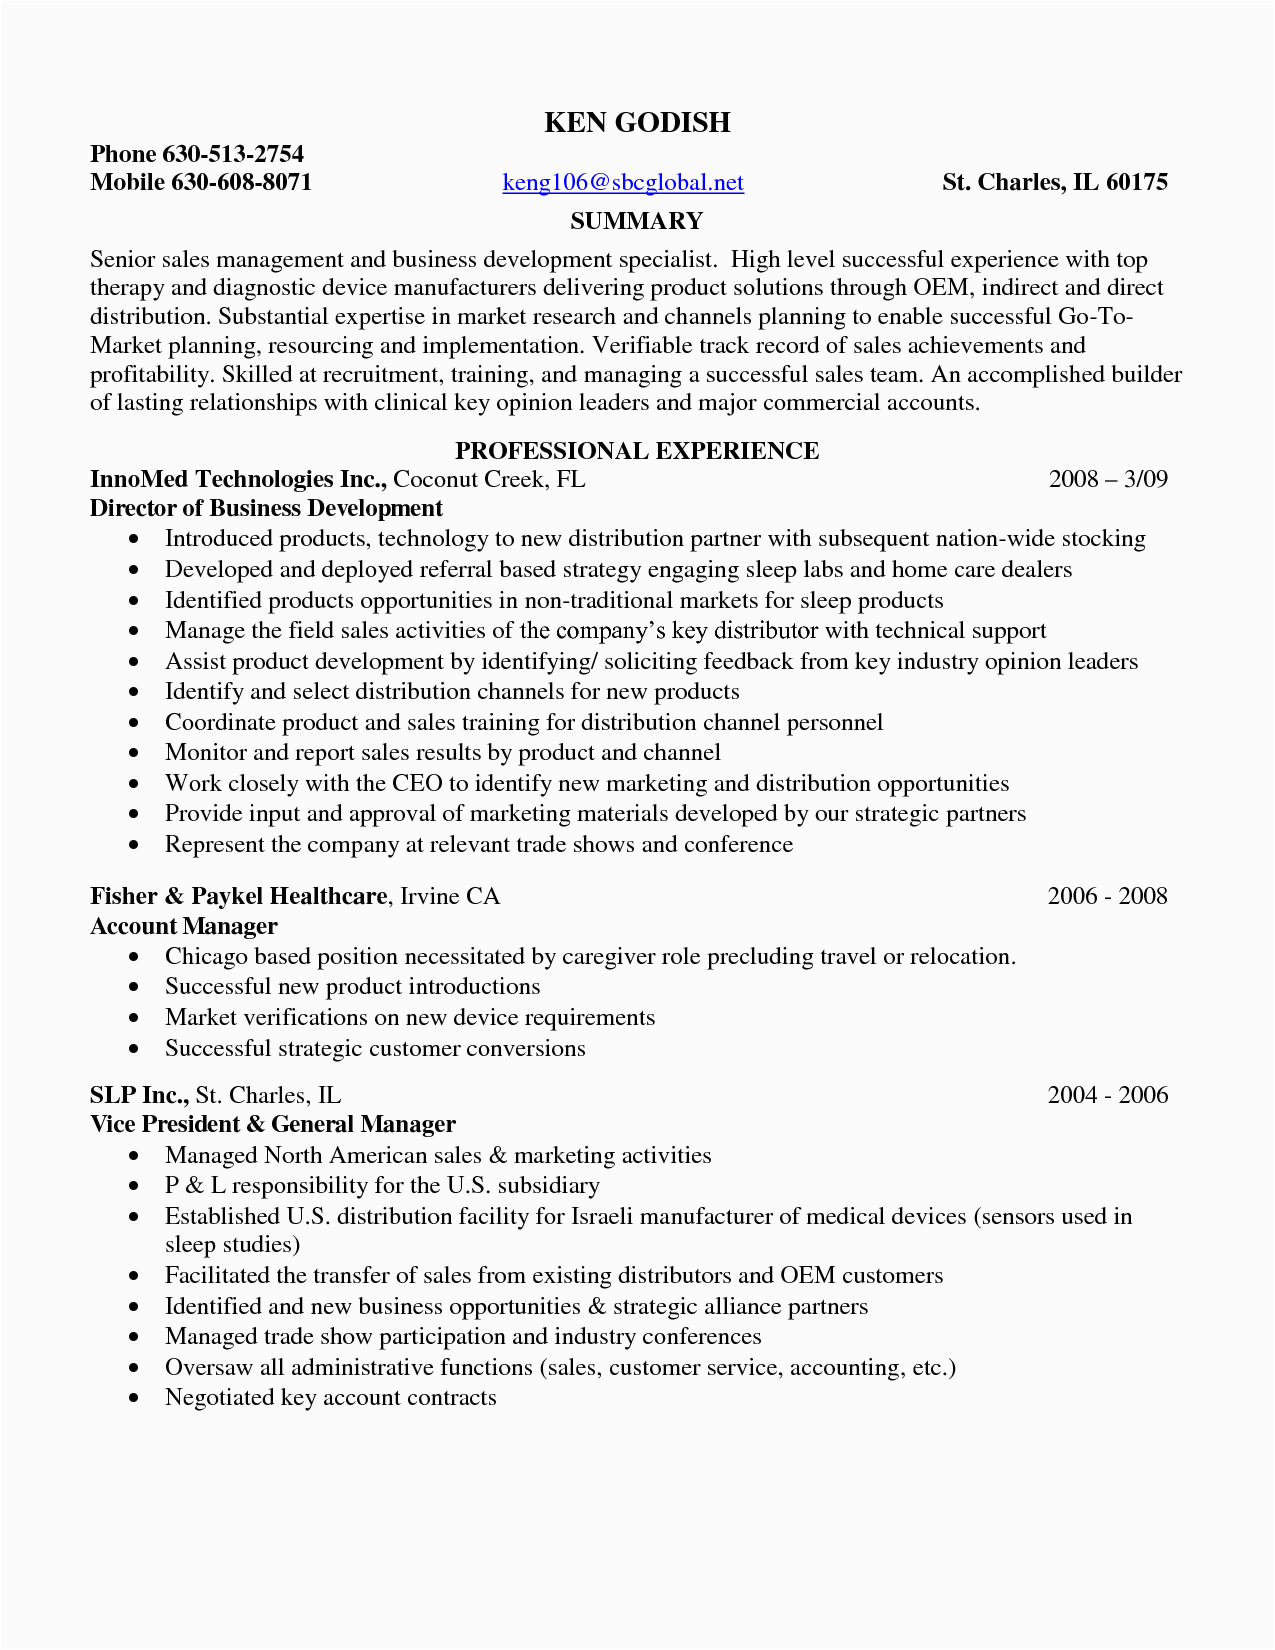 Sample Resume for Medical Representative Applicant Medical Sales Resume Summary United Medical A Lincare